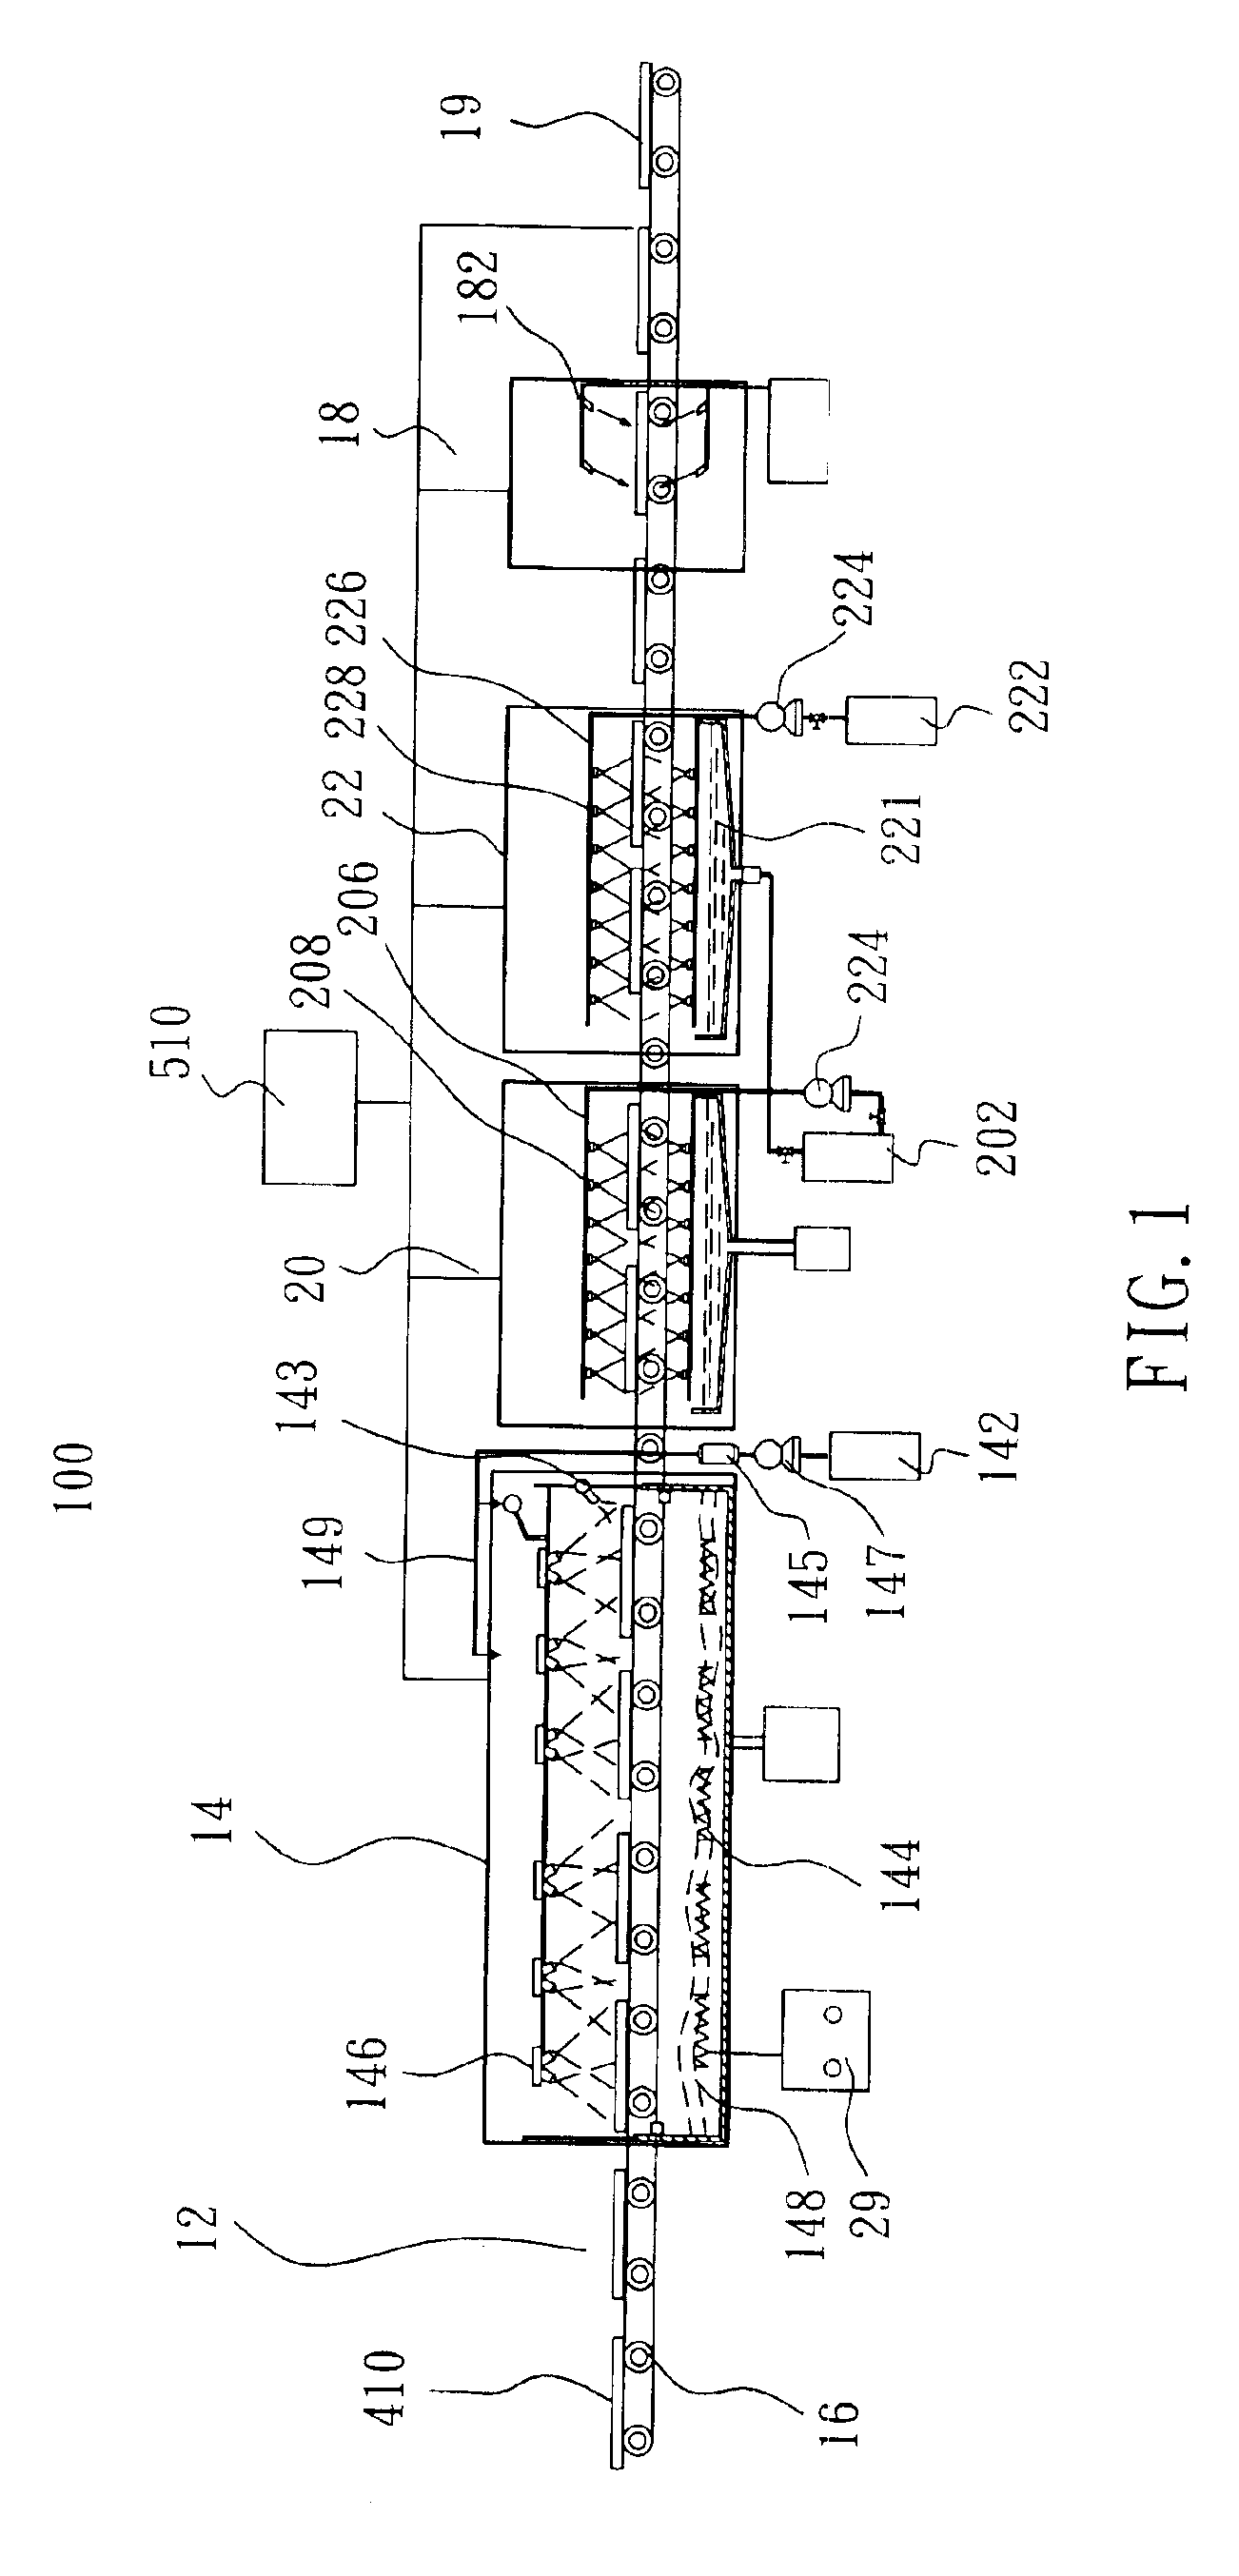 Developing apparatus and method for developing organic electroluminescent display panels